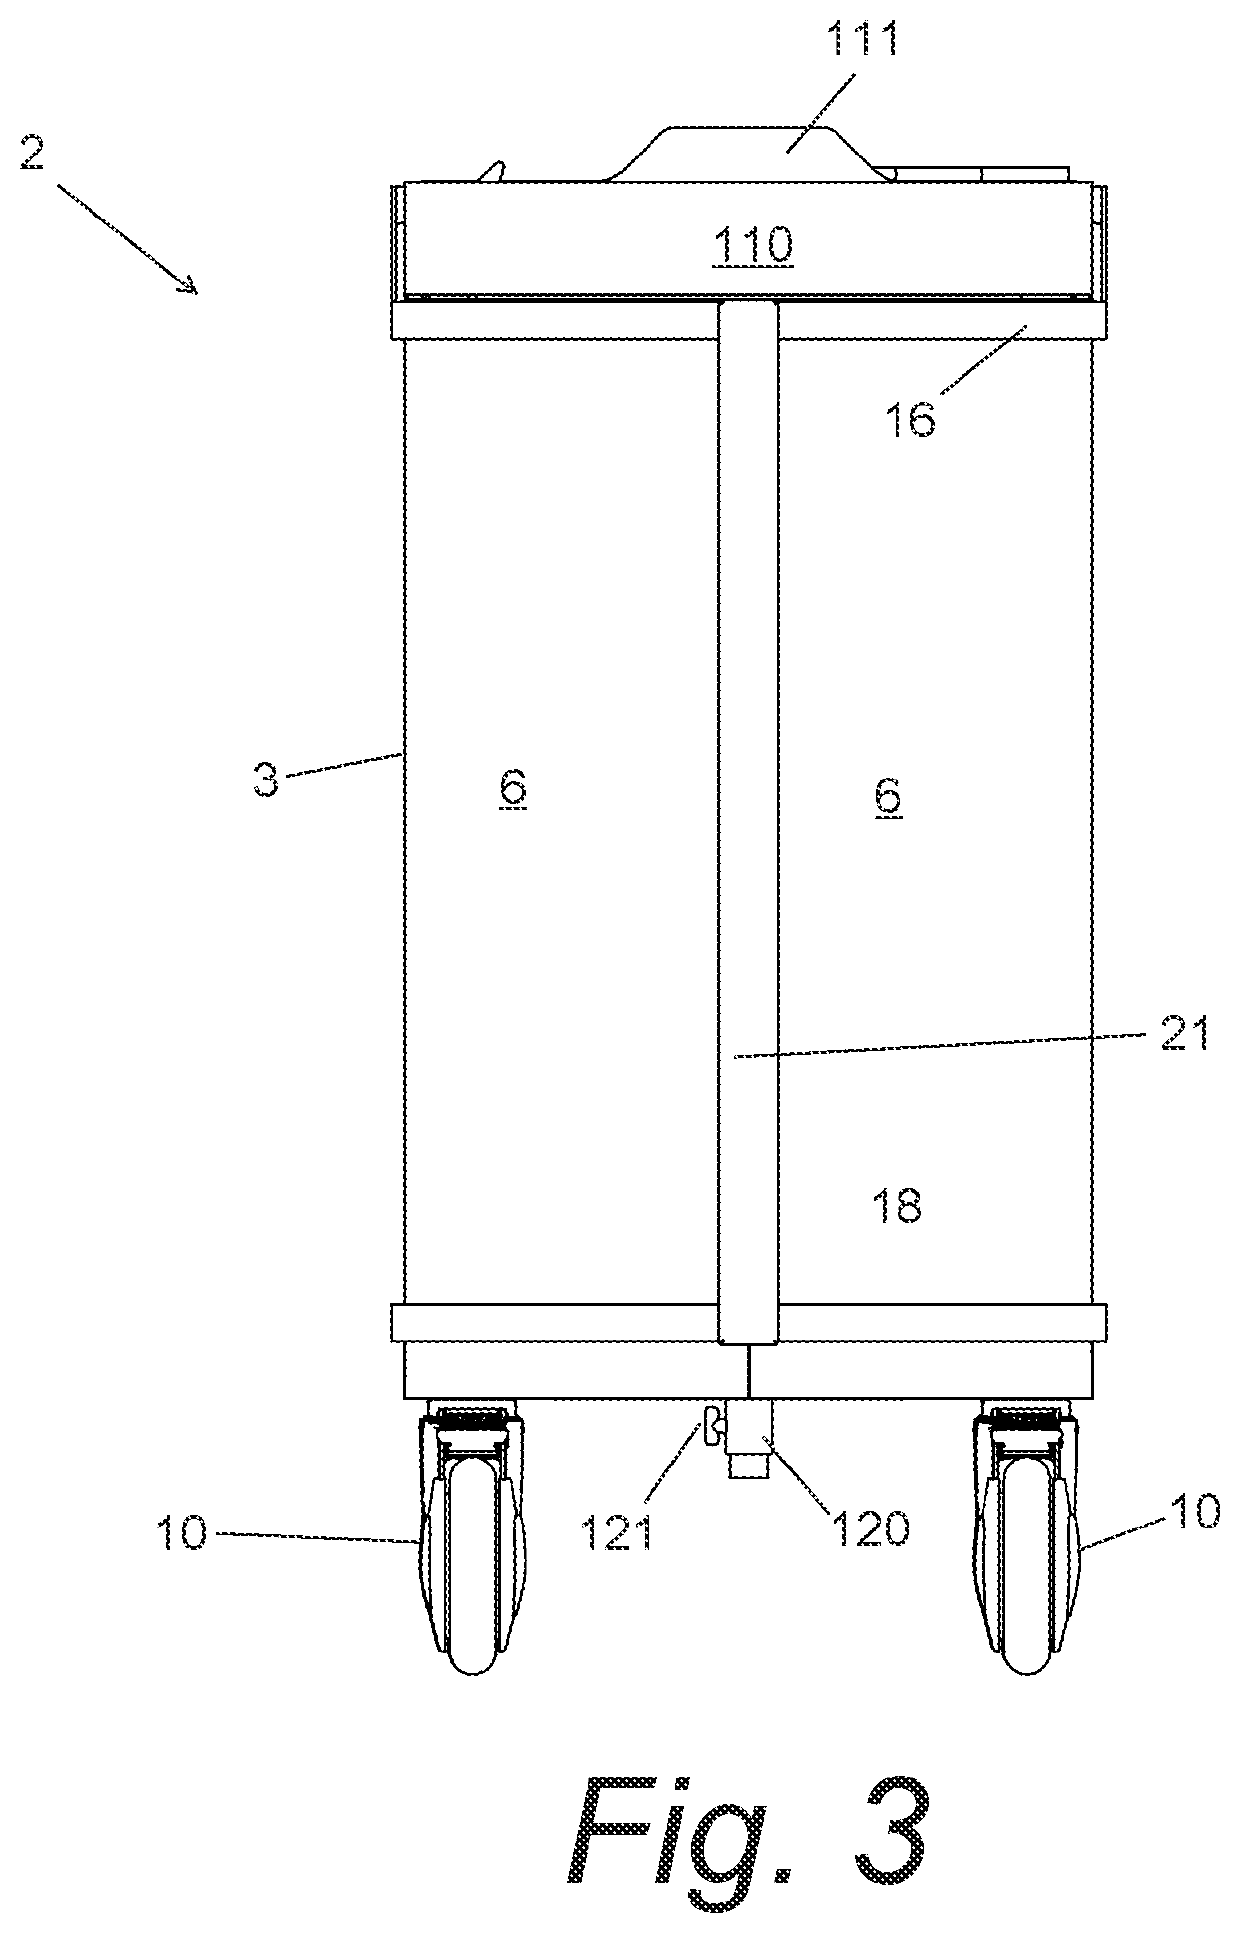 Mobile serving device and method